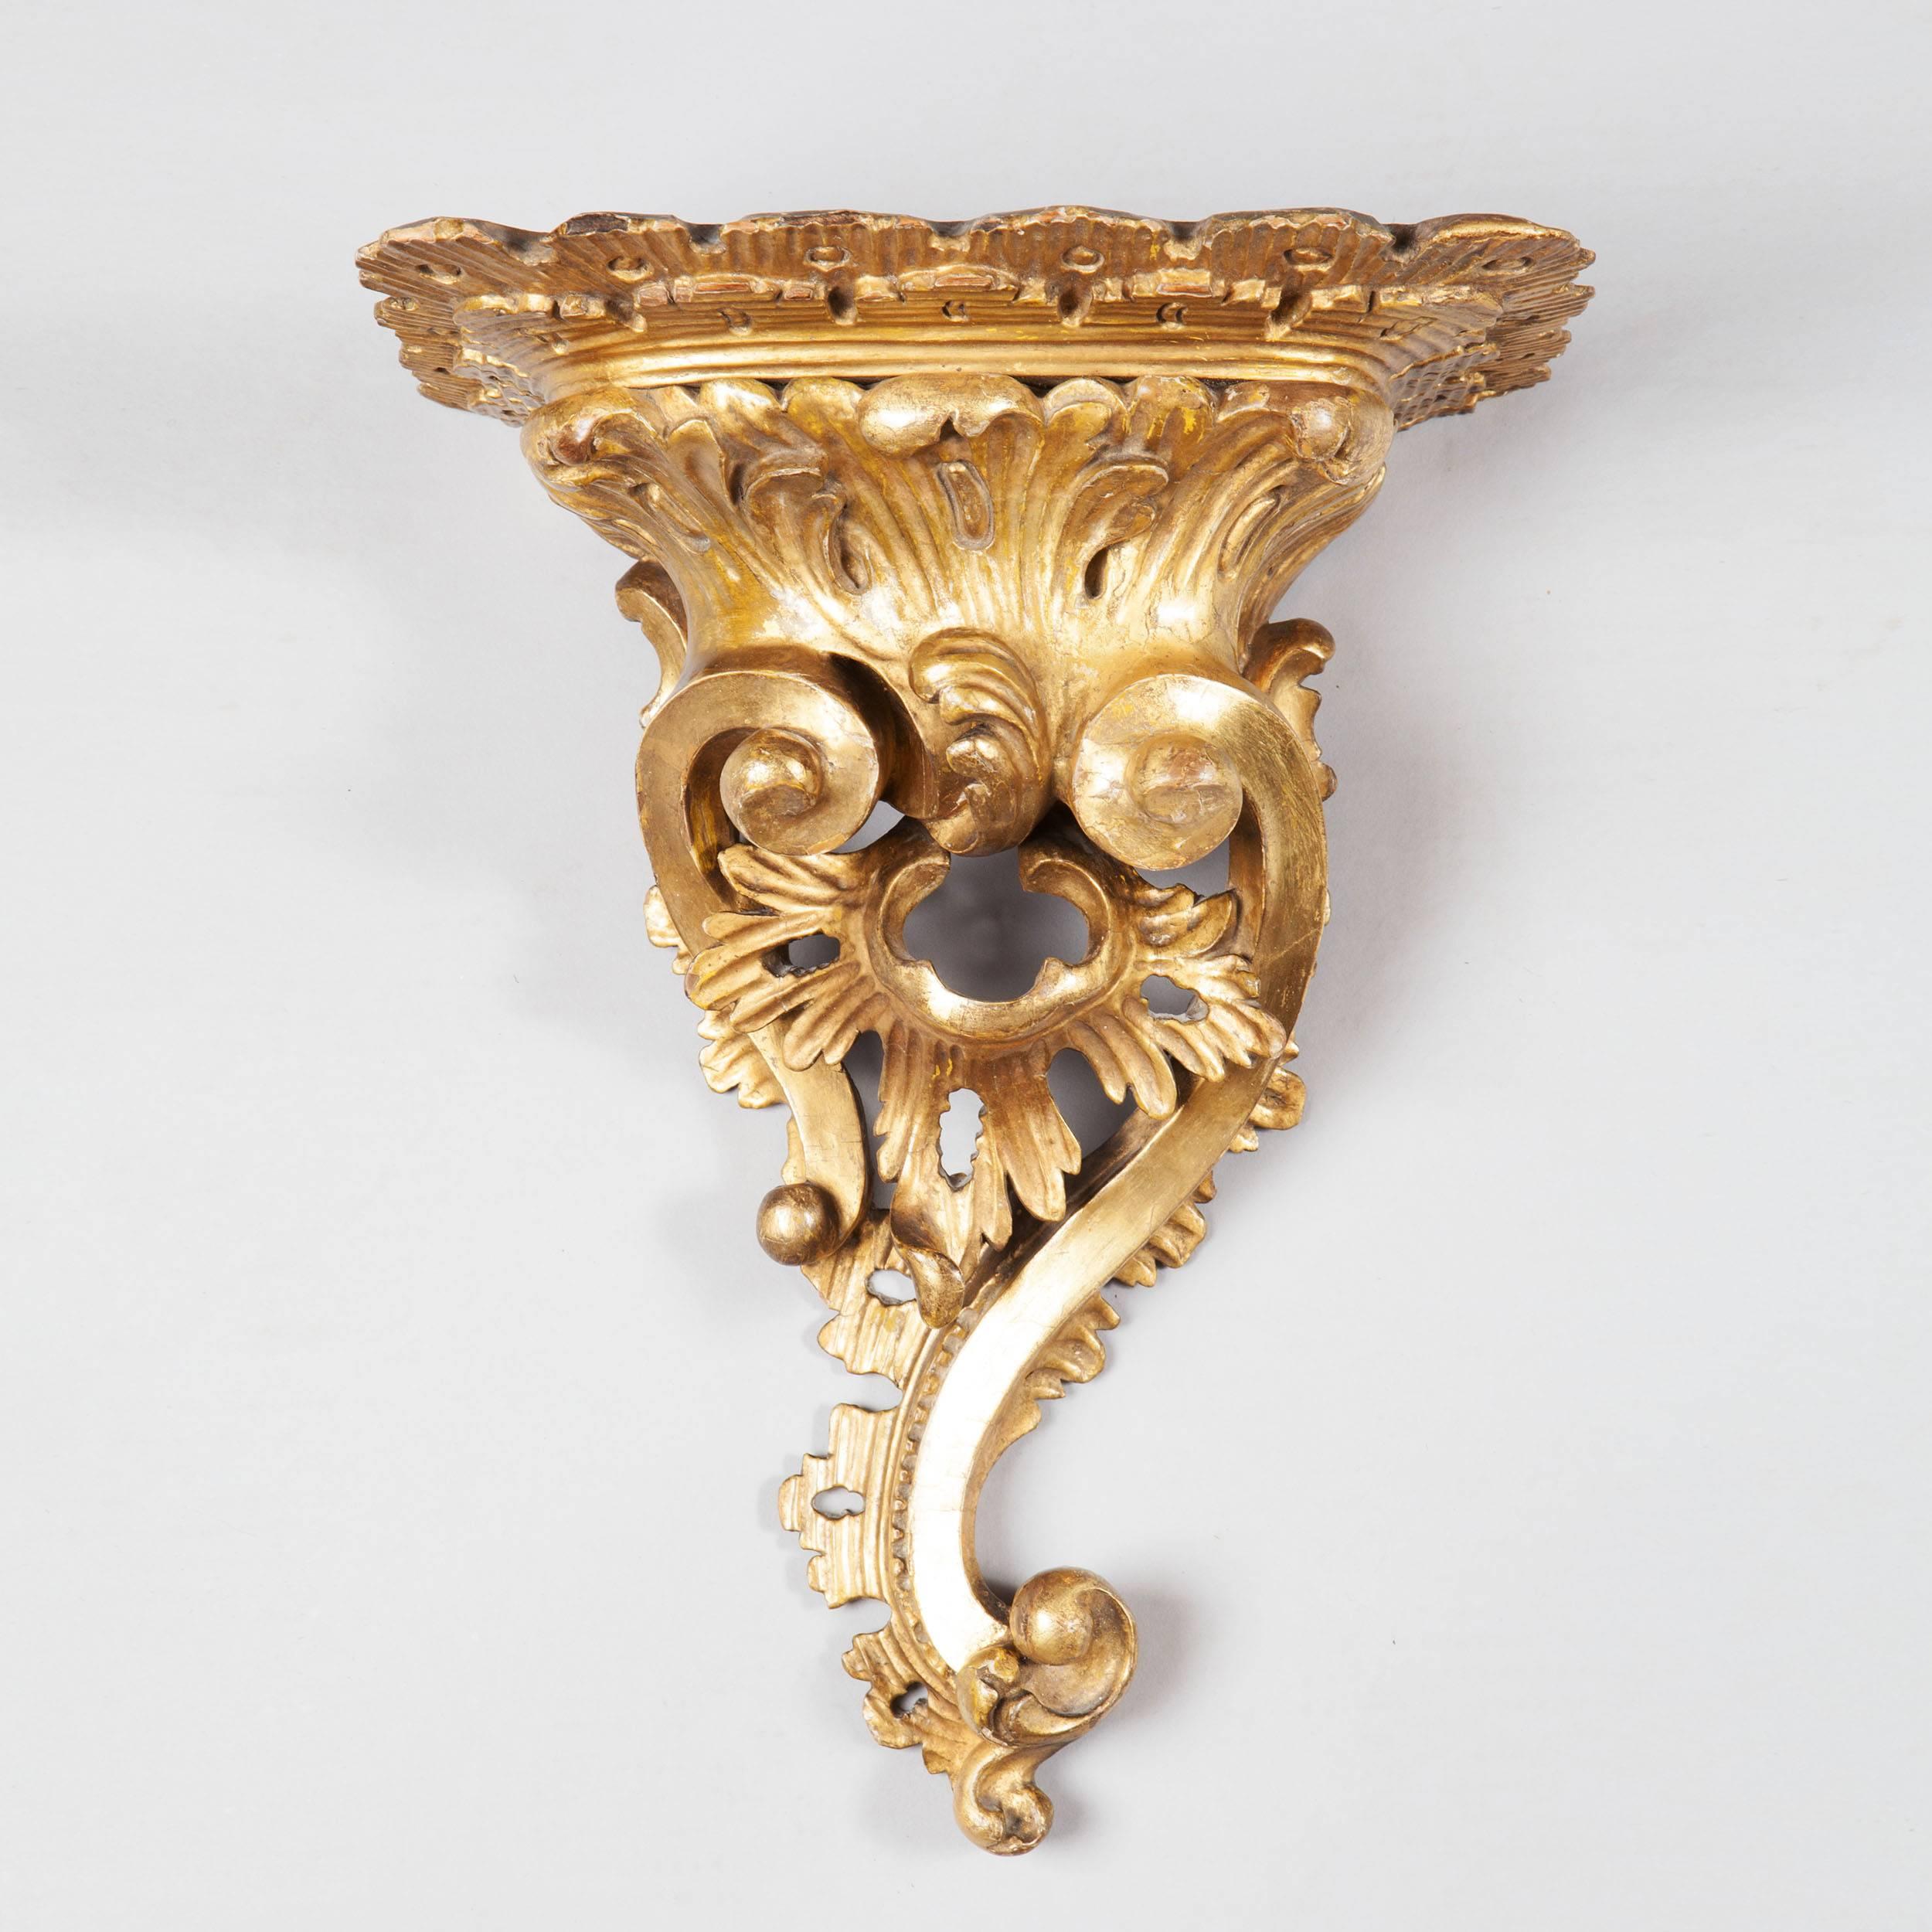 English Rococo 18th Century Giltwood Wall Bracket In Excellent Condition In London, by appointment only